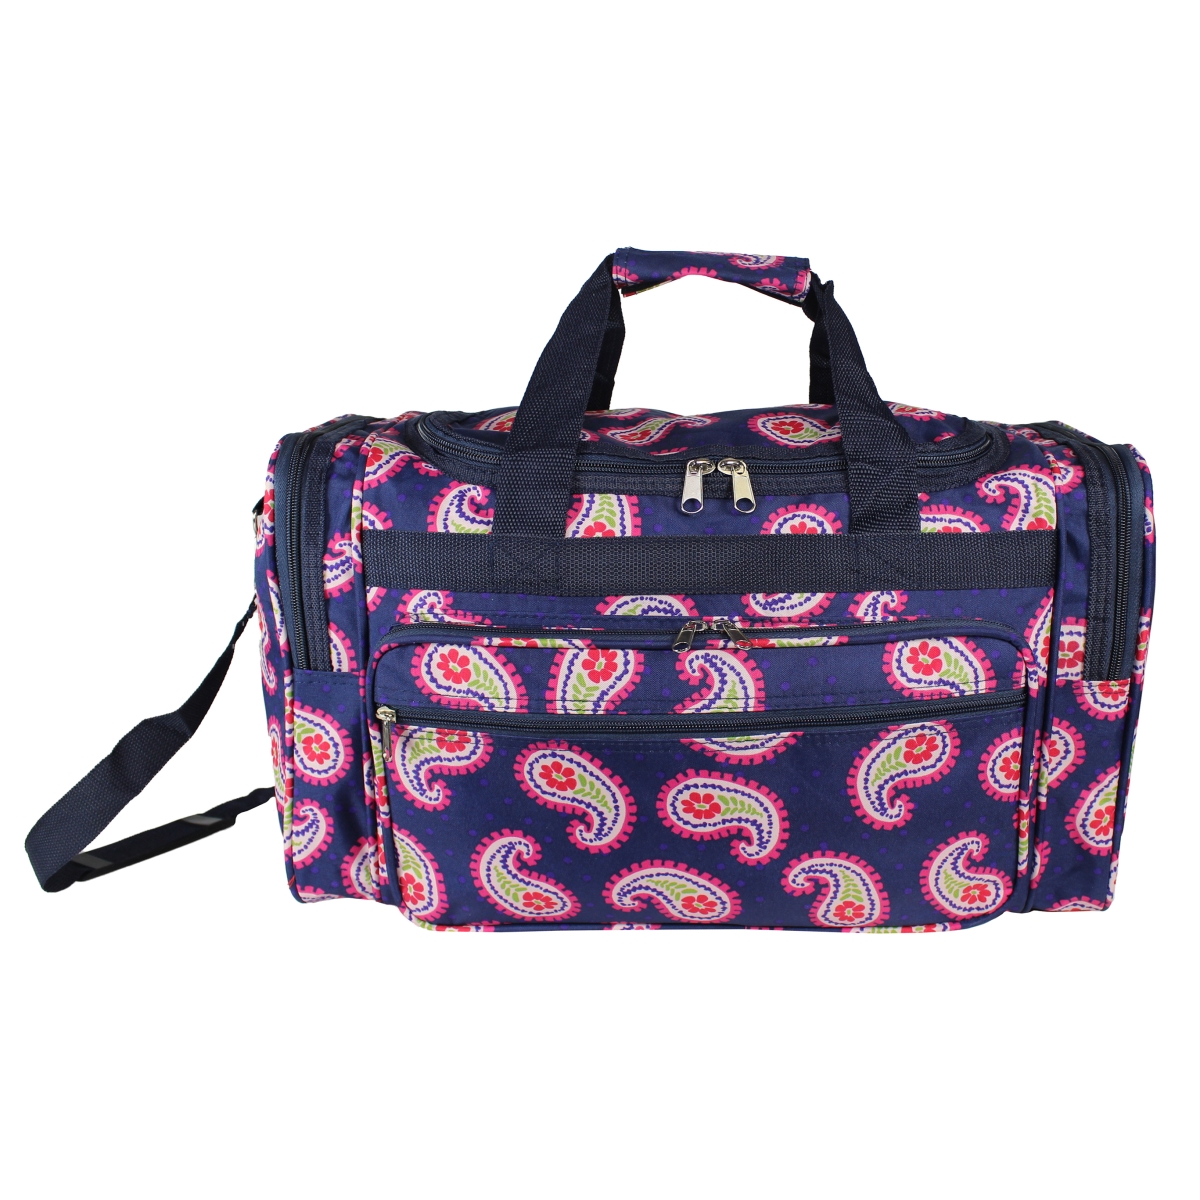 81t22-230 22 In. Carry-on Duffel Bag - Floral Paisley